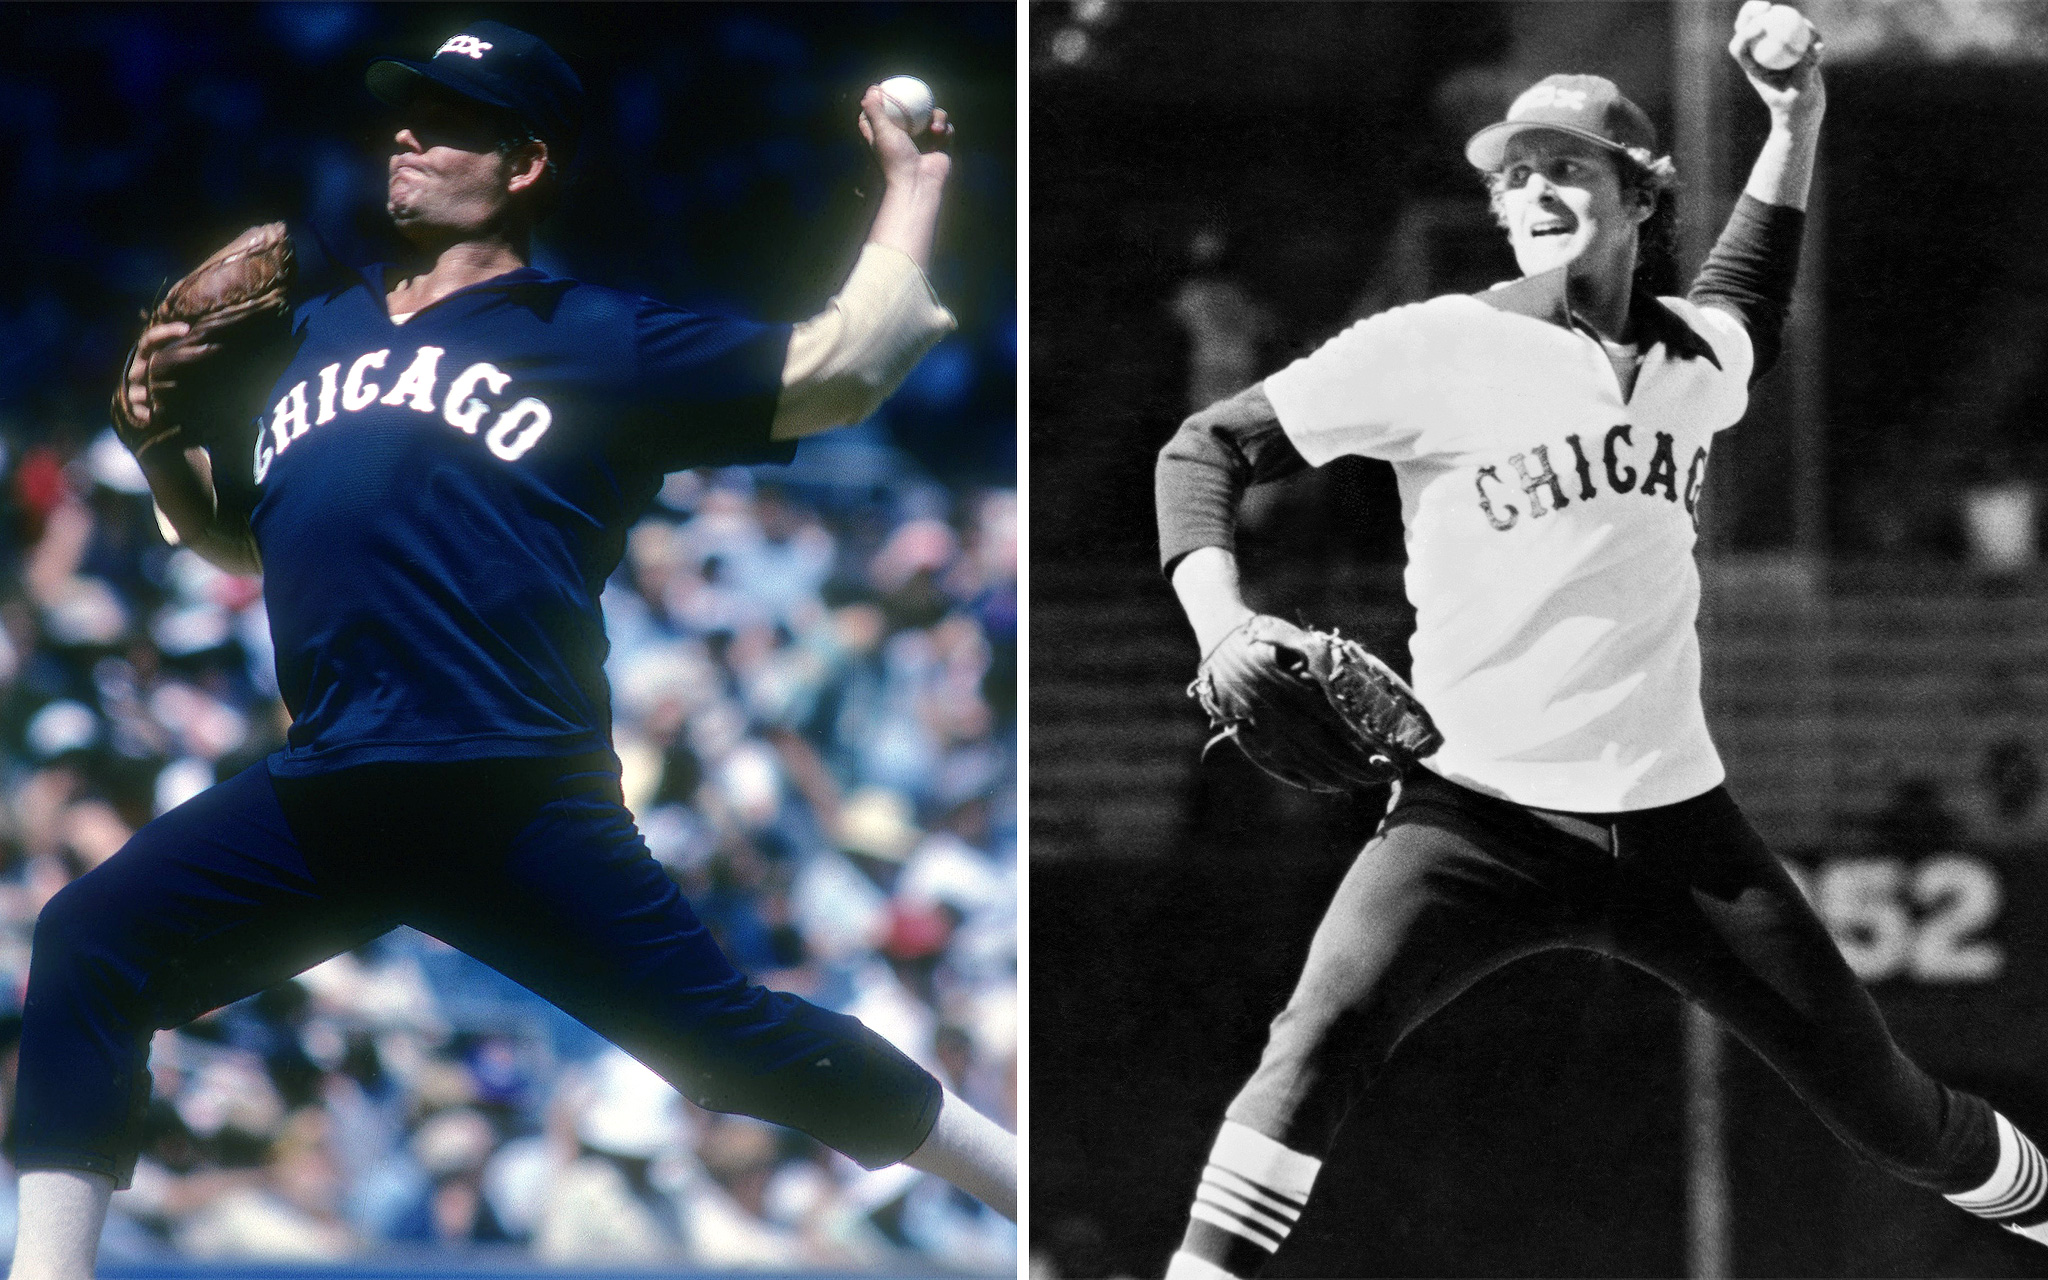 MLB retro uniforms: The good, the bad, and the ugly